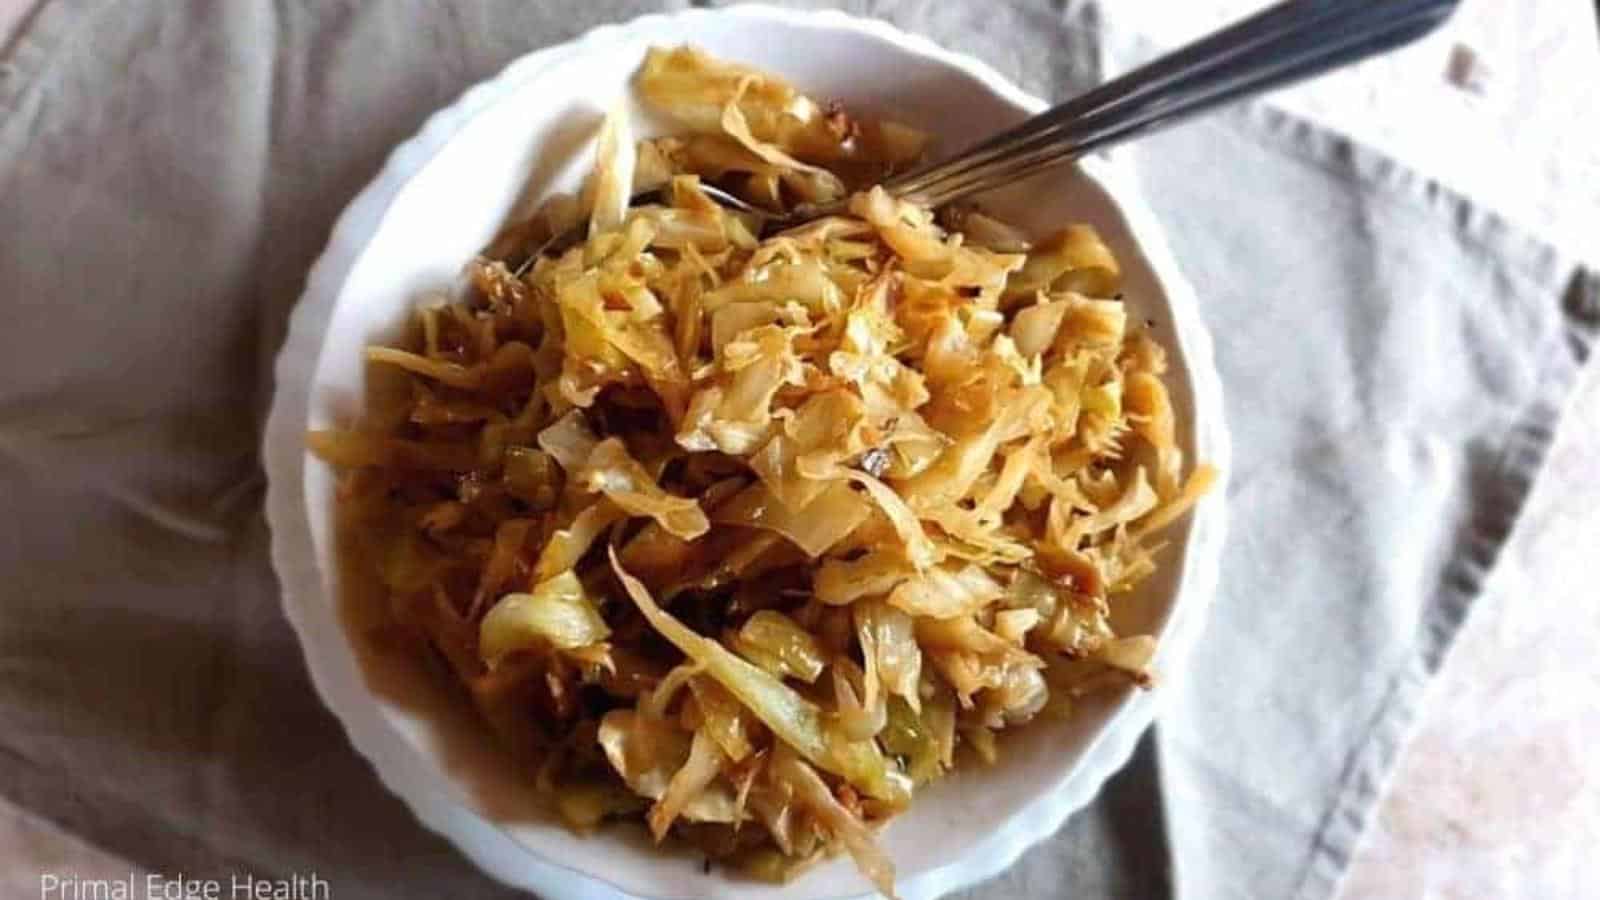 Braised cabbage in bowl with spoon.